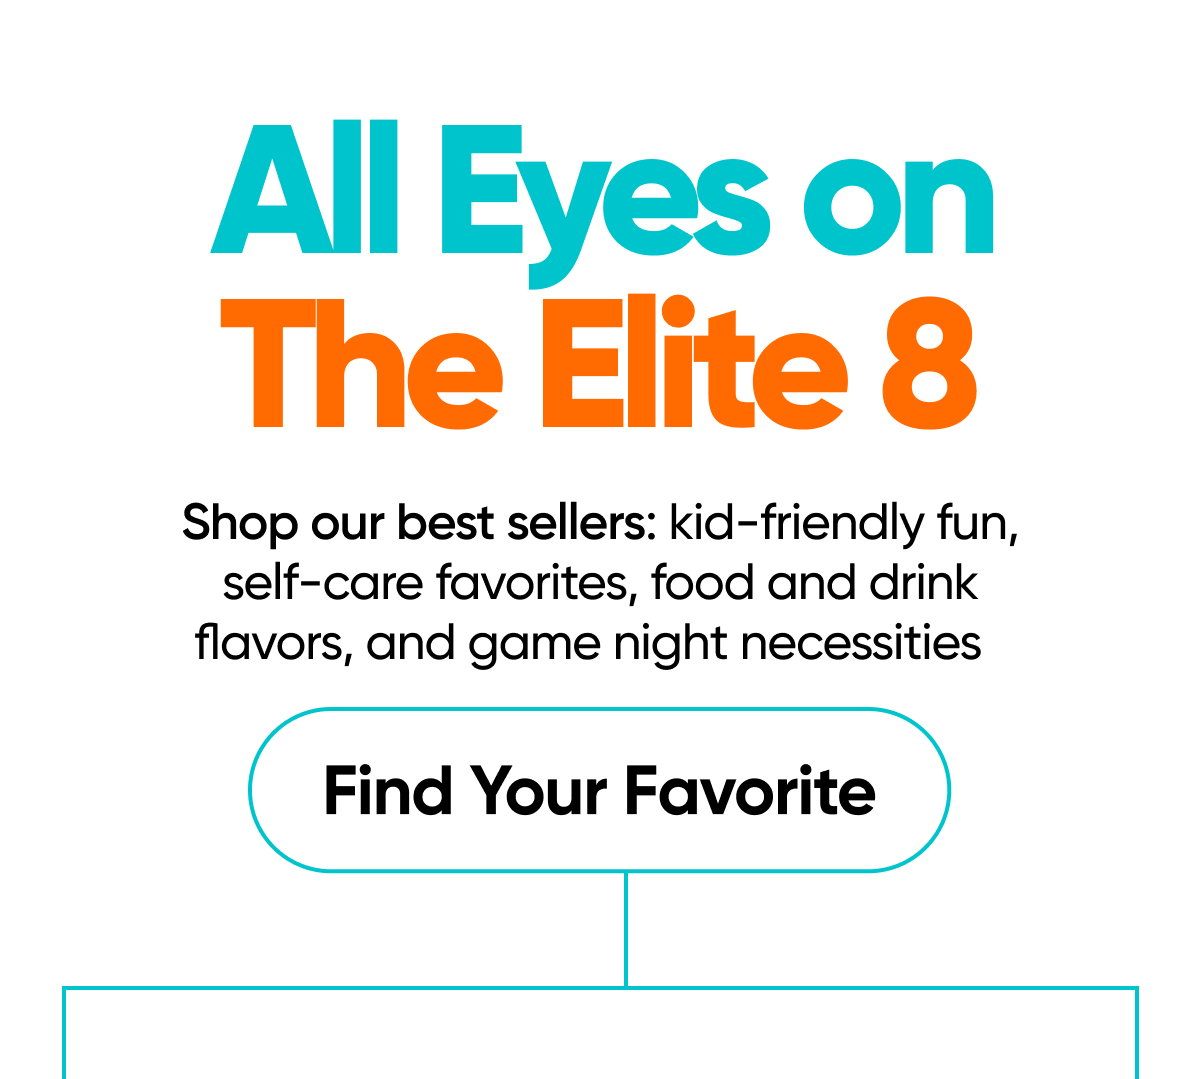 All Eyes on The Elite 8  Shop our best sellers: kid-friendly fun, self-care favorites, food and drink flavors, and game night necessities     Find Your Favorite